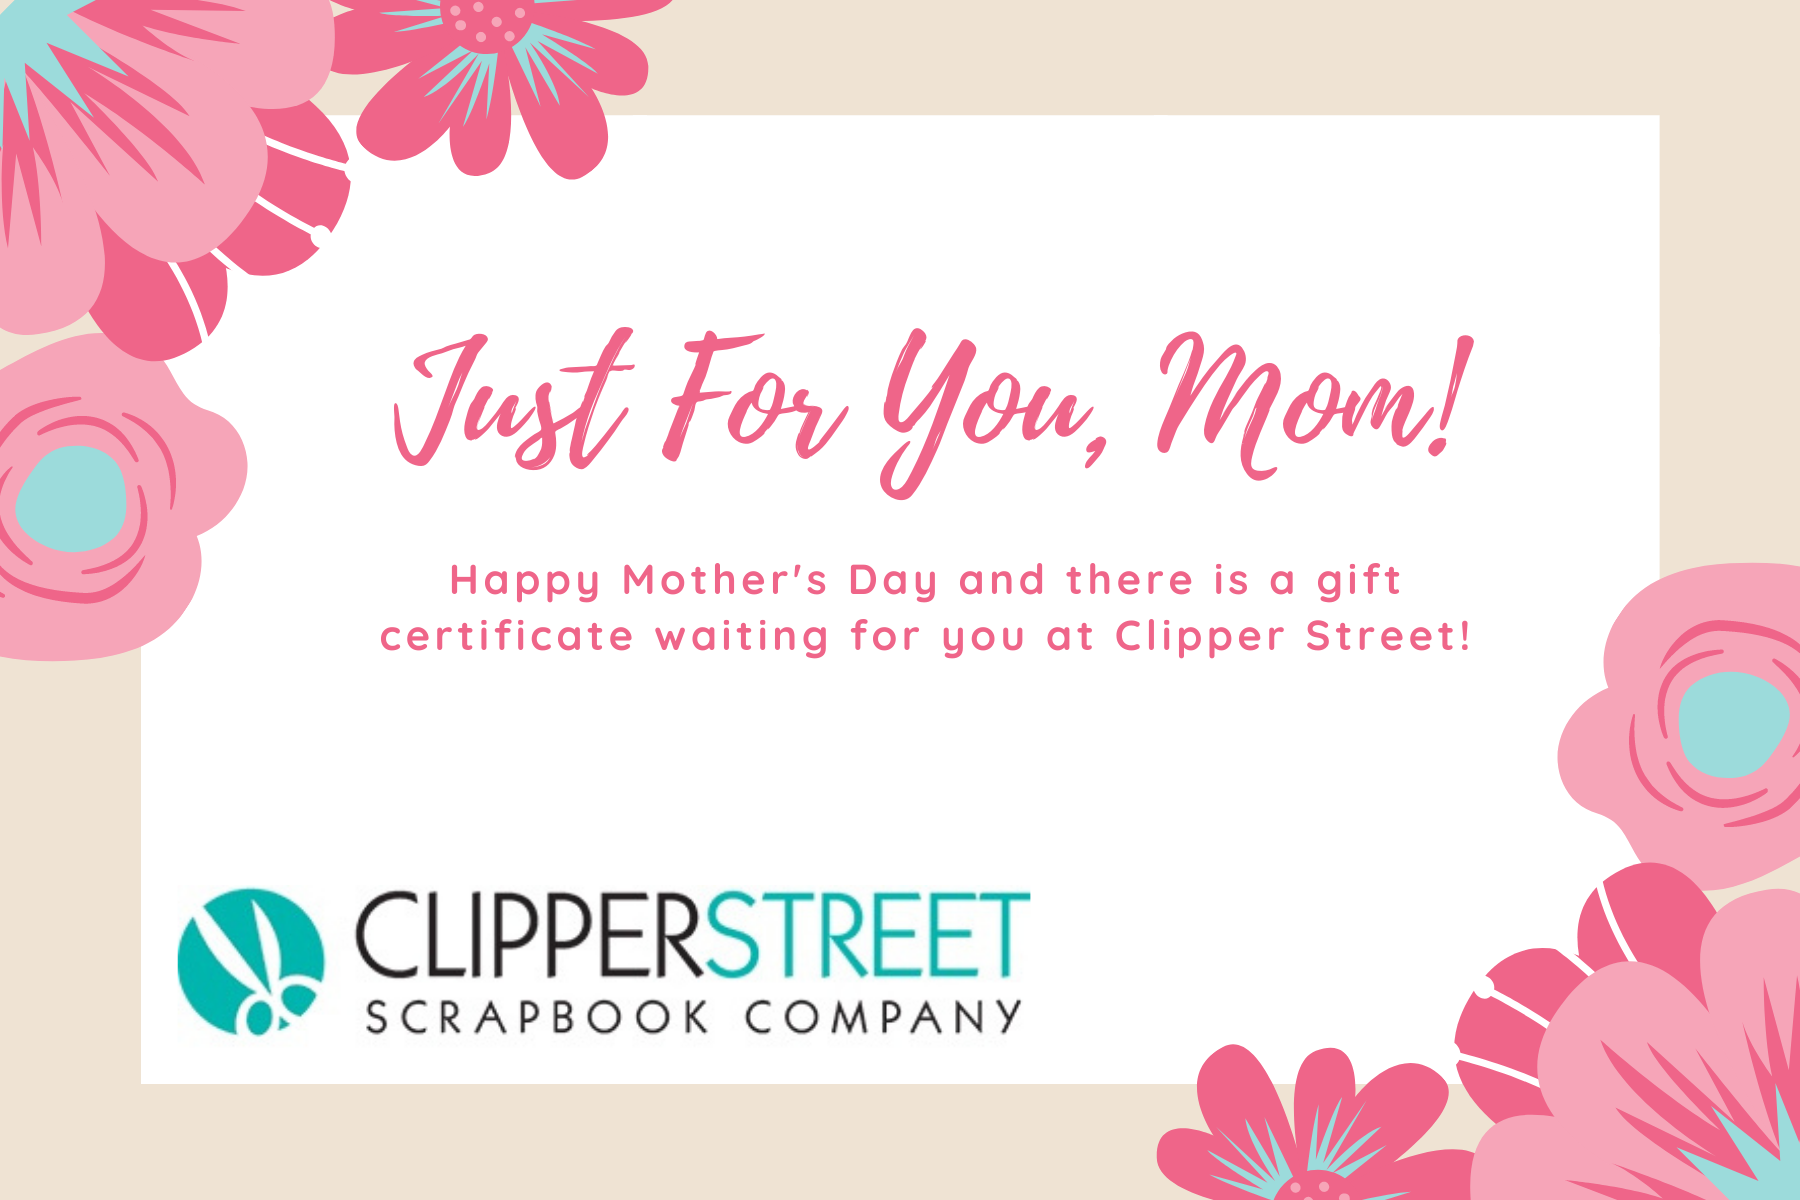 $25.00 Gift Certificate for Mother's Day